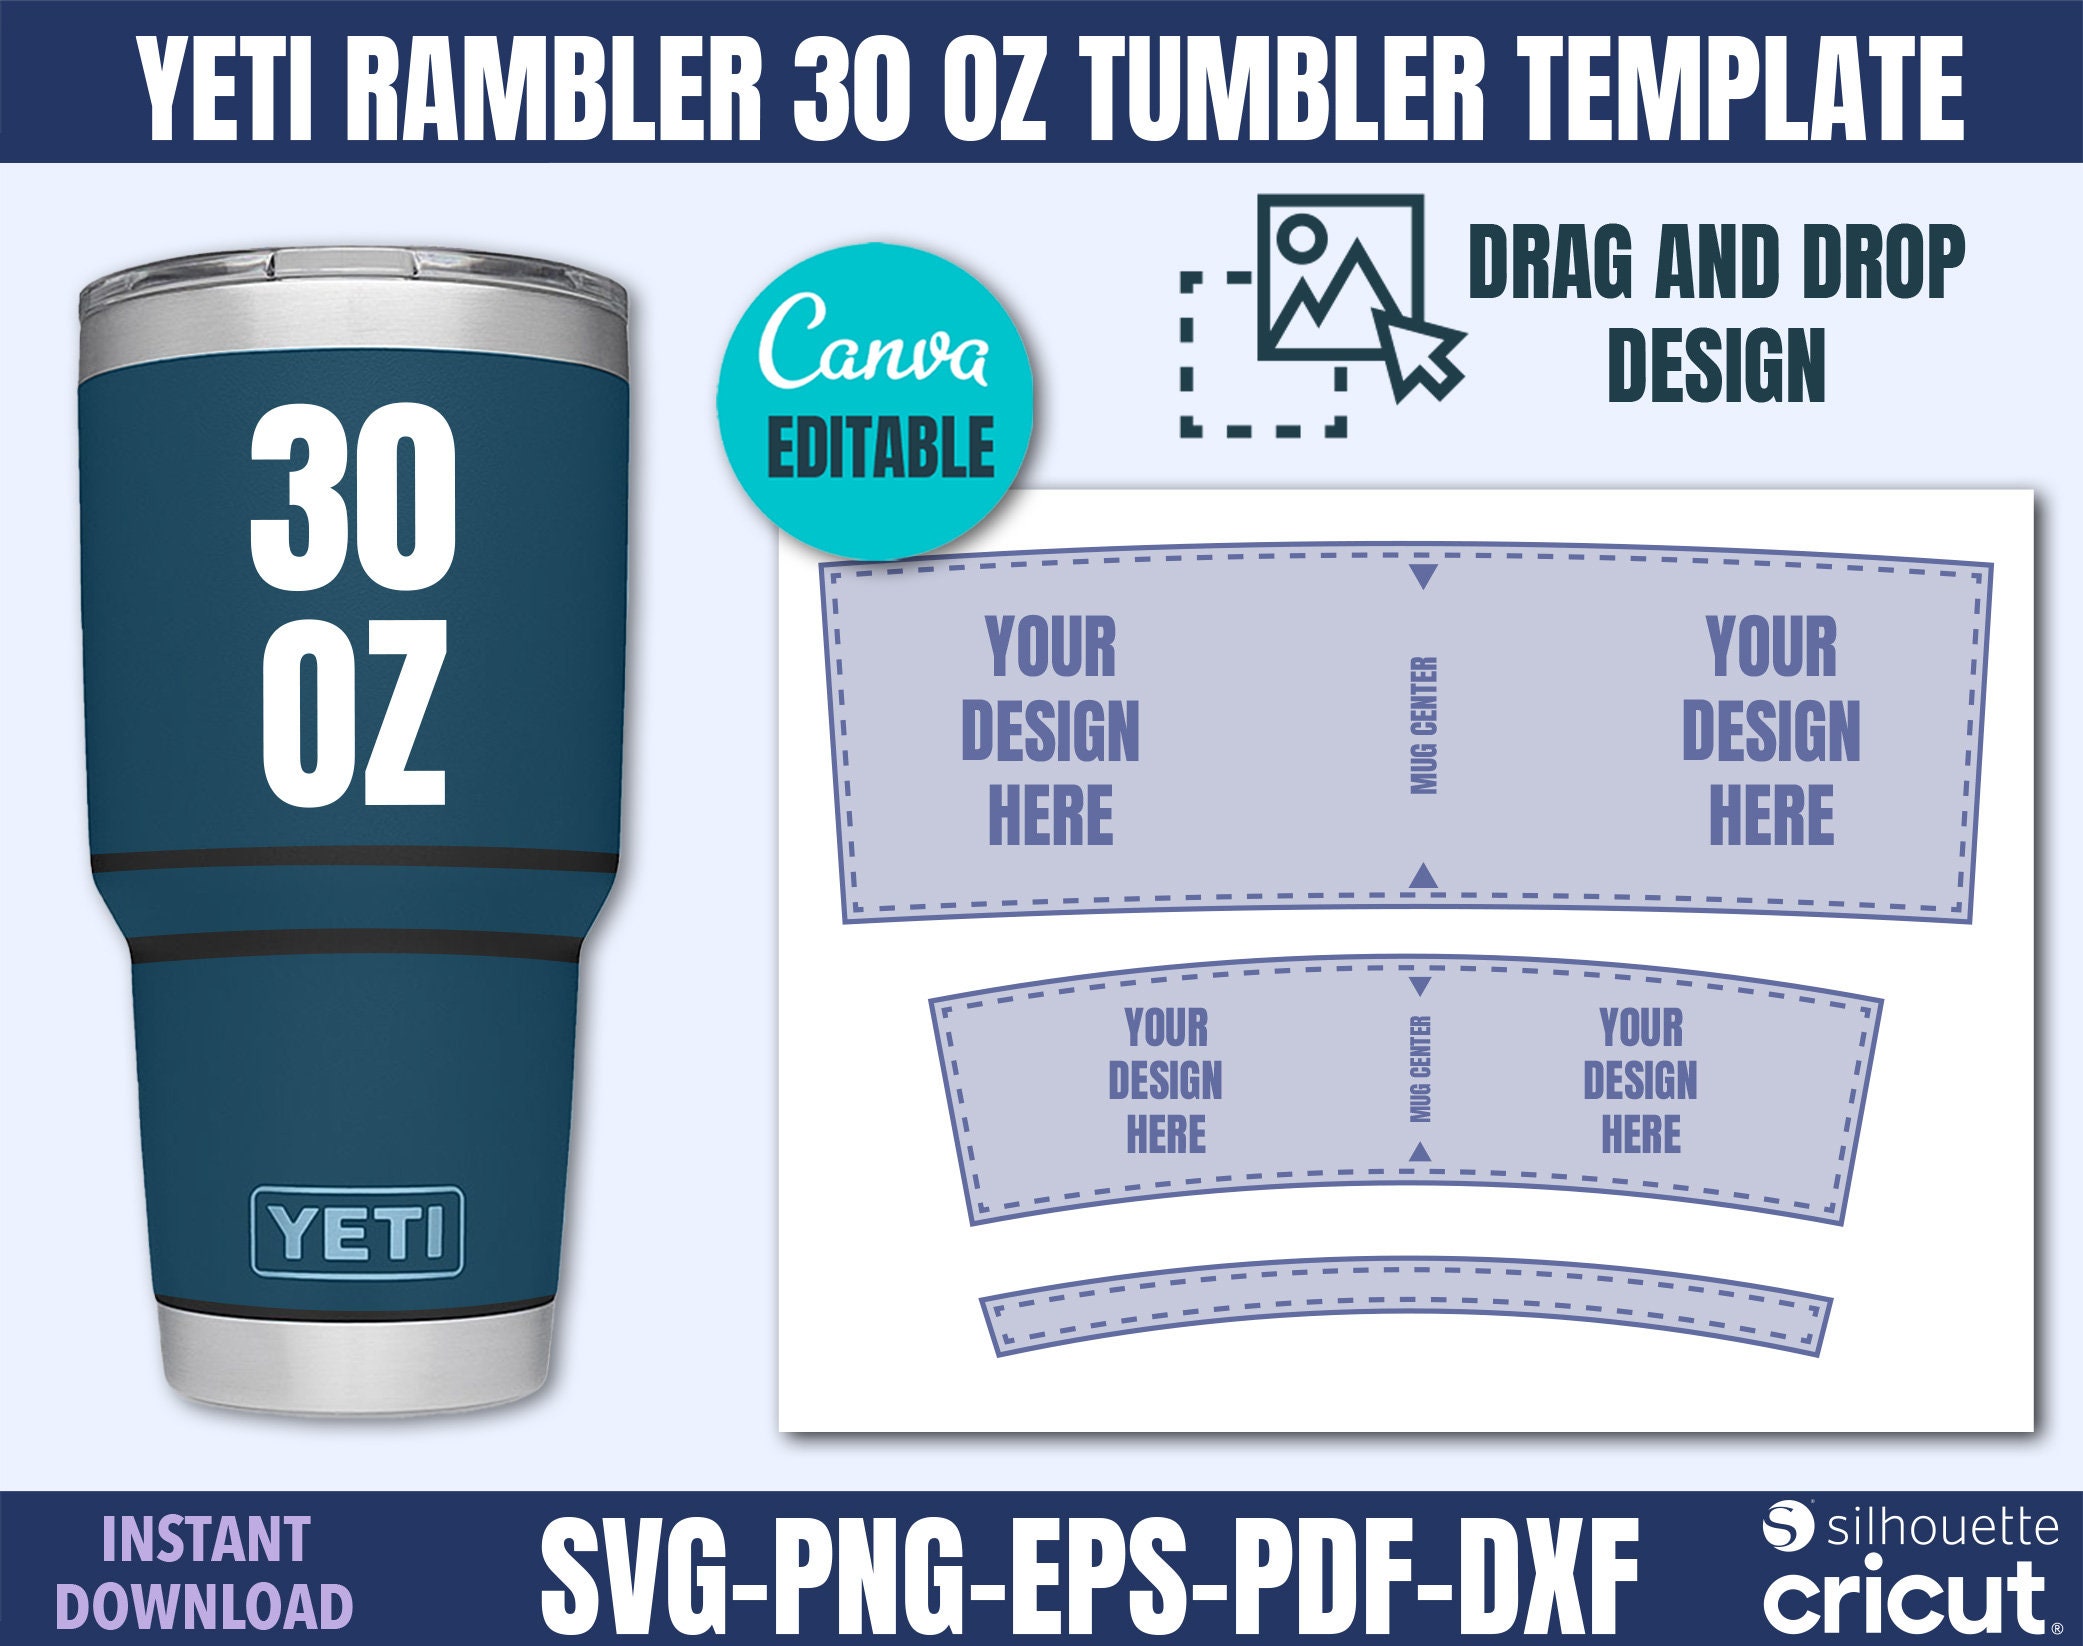 30oz Ozark Trail Tumbler BLANK Template for Sublimation, Full Wrap, 30 Oz,  for Photoshop, for Cricut, for Canva, Png, Svg, Instant Download (Instant  Download) 